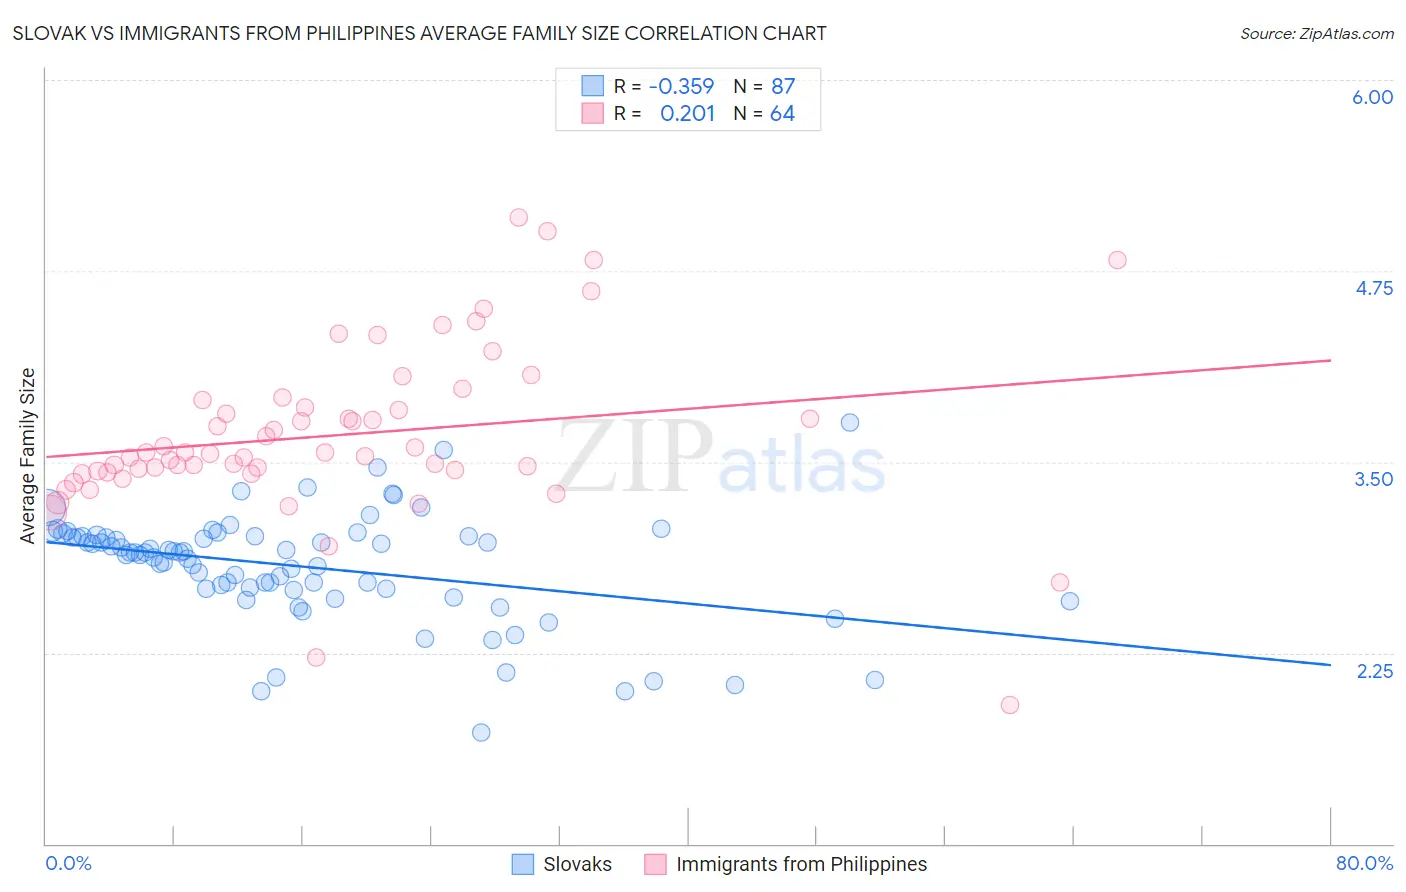 Slovak vs Immigrants from Philippines Average Family Size